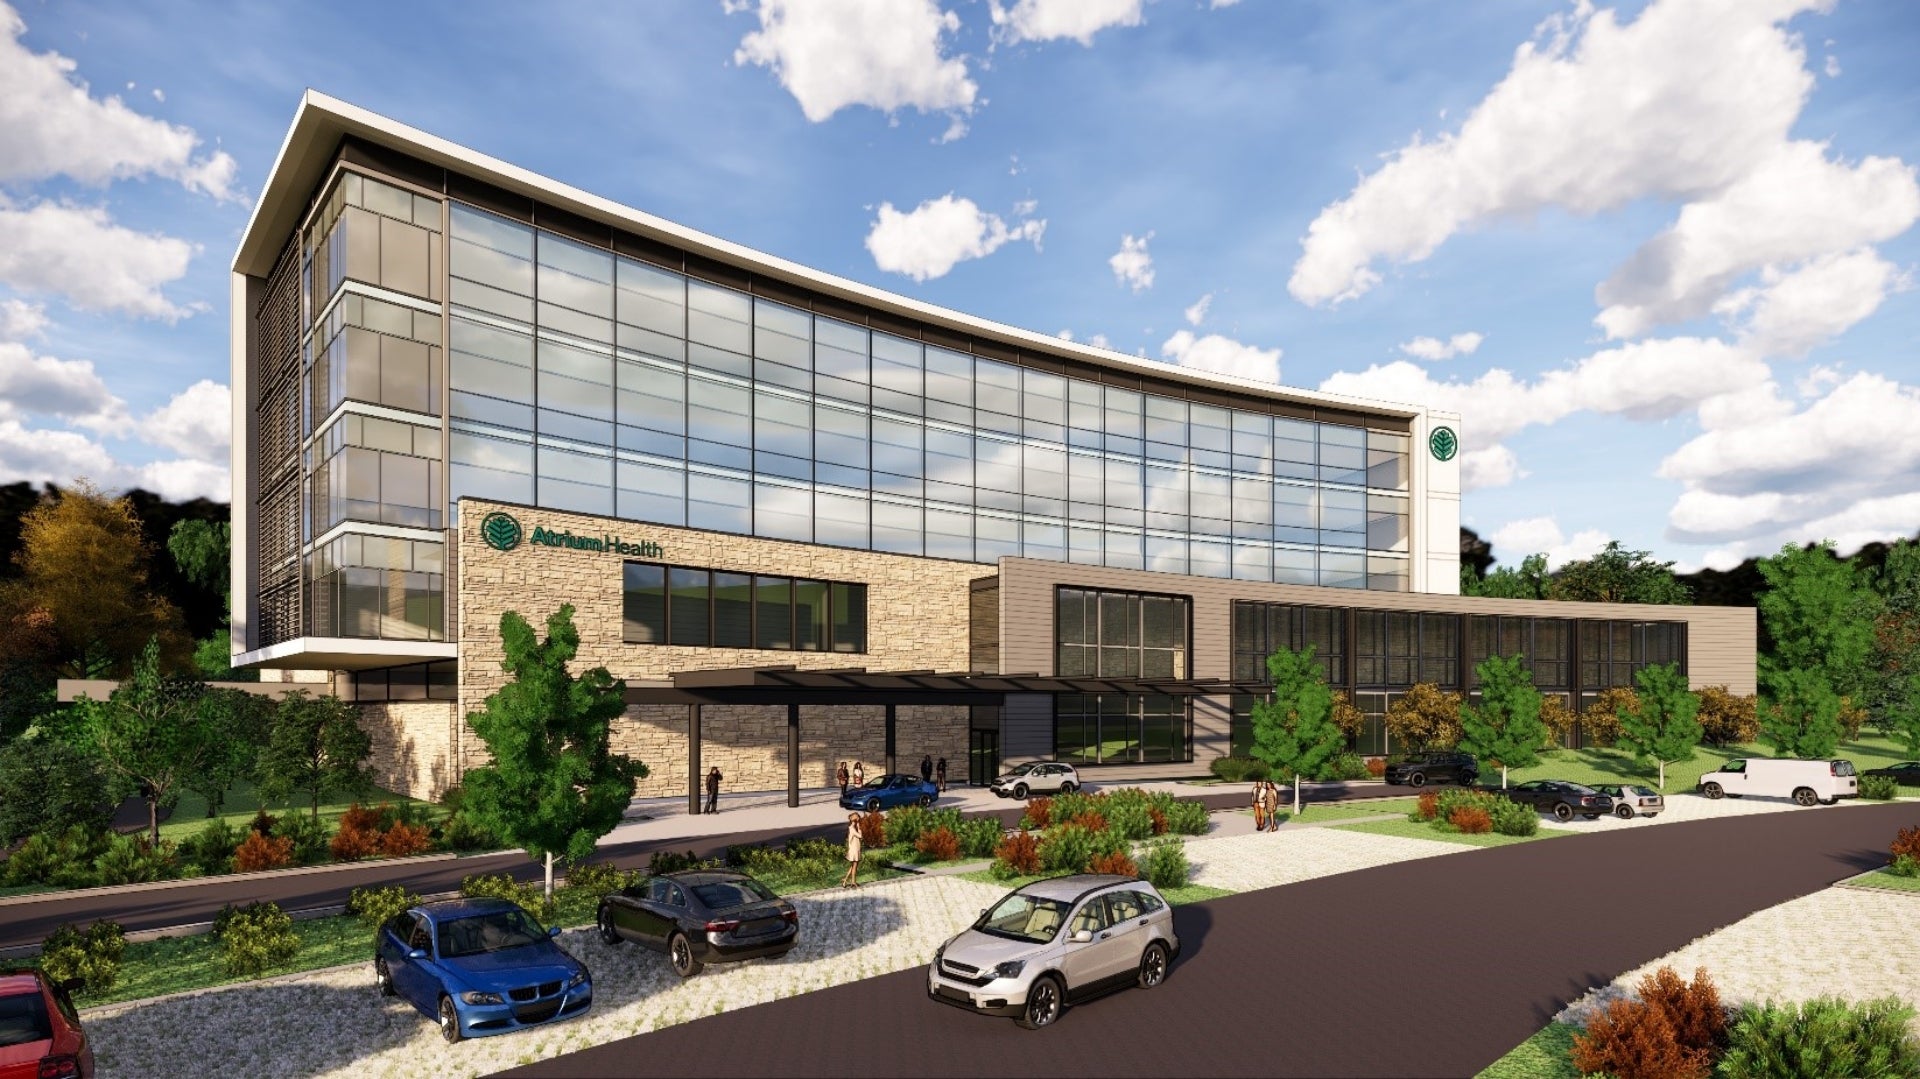 Atrium Health gets approval for new $154m hospital in North Carolina